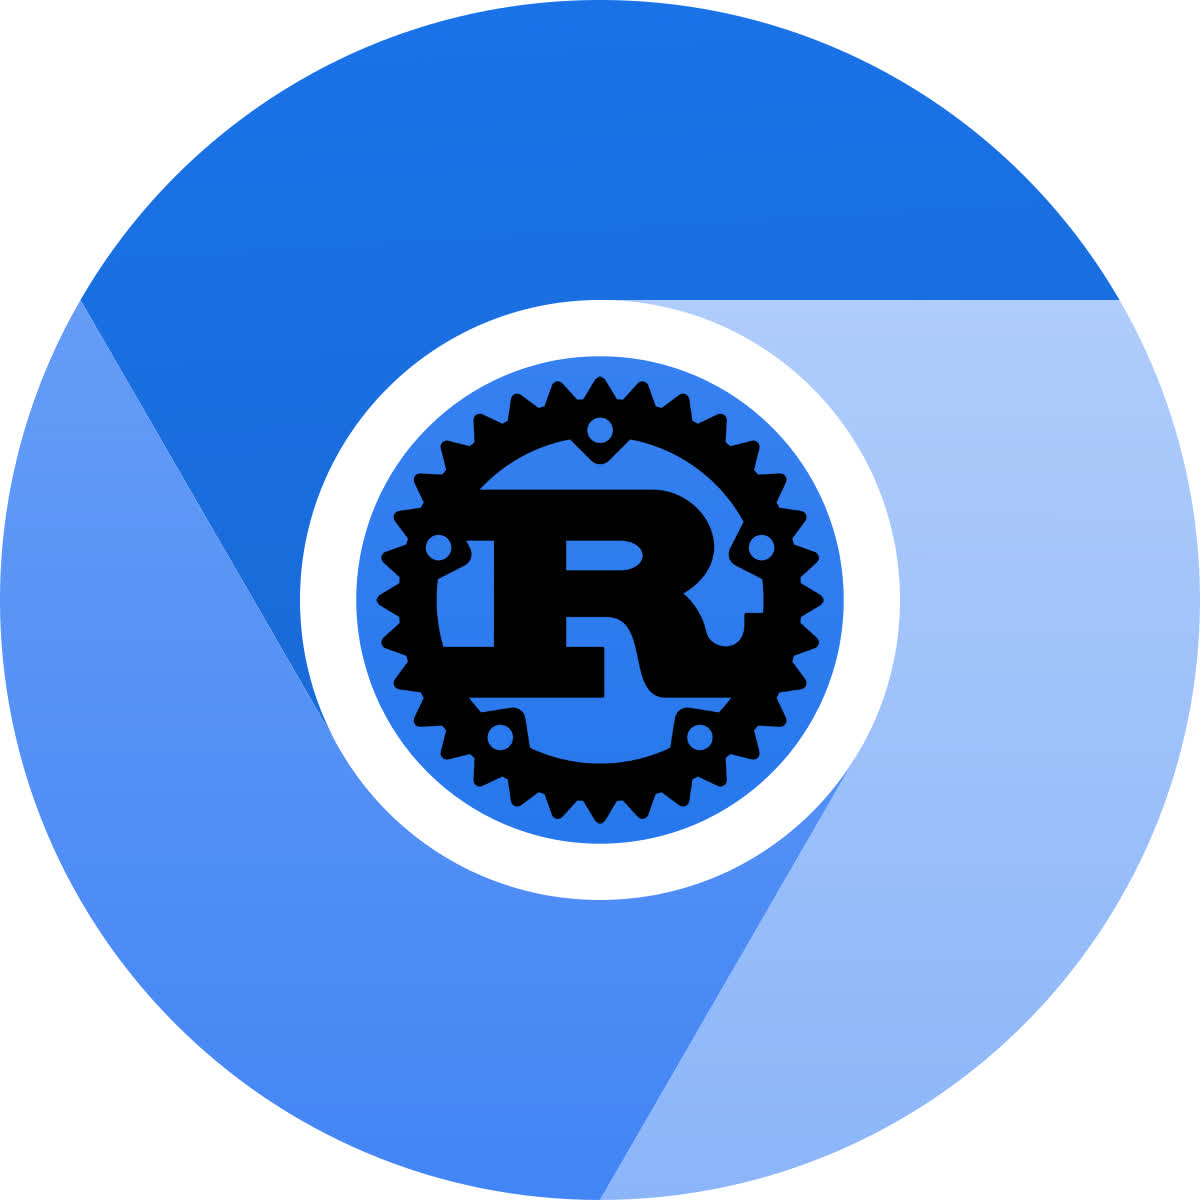 The Chromium Mission will help the Rust programming language